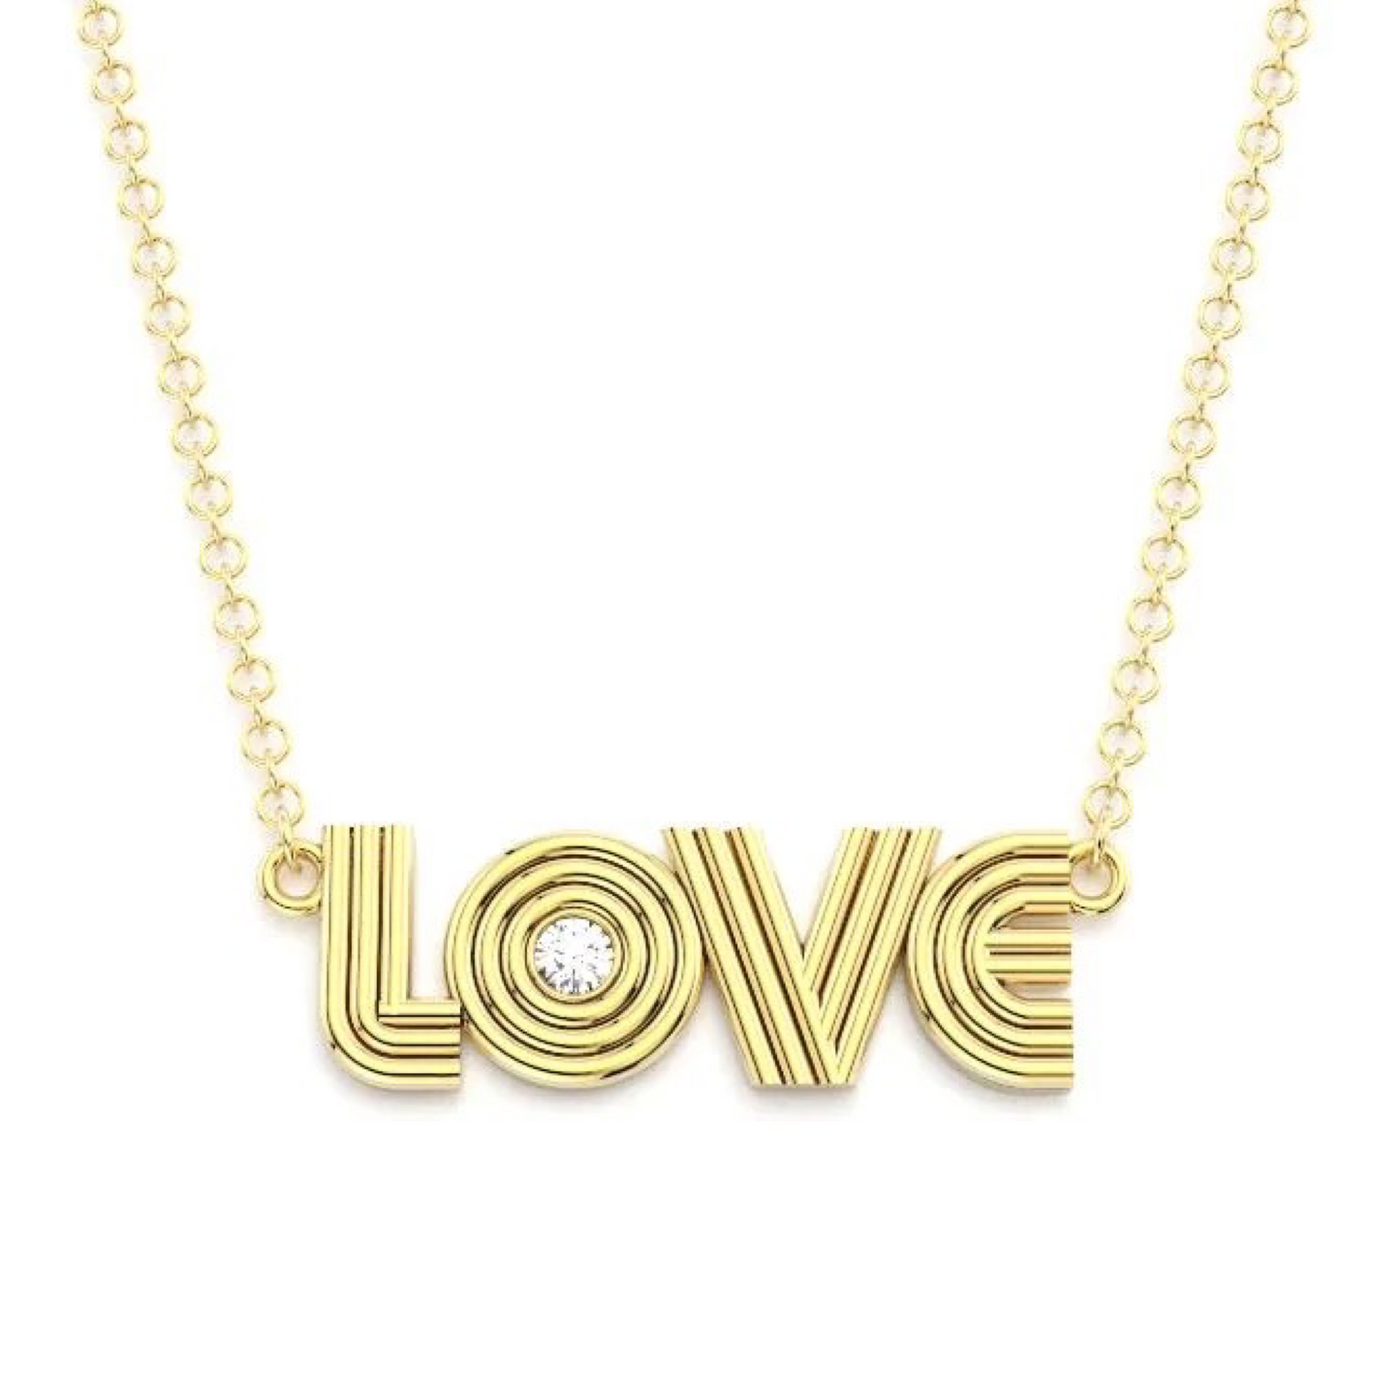 Radiant Love and diamond necklace